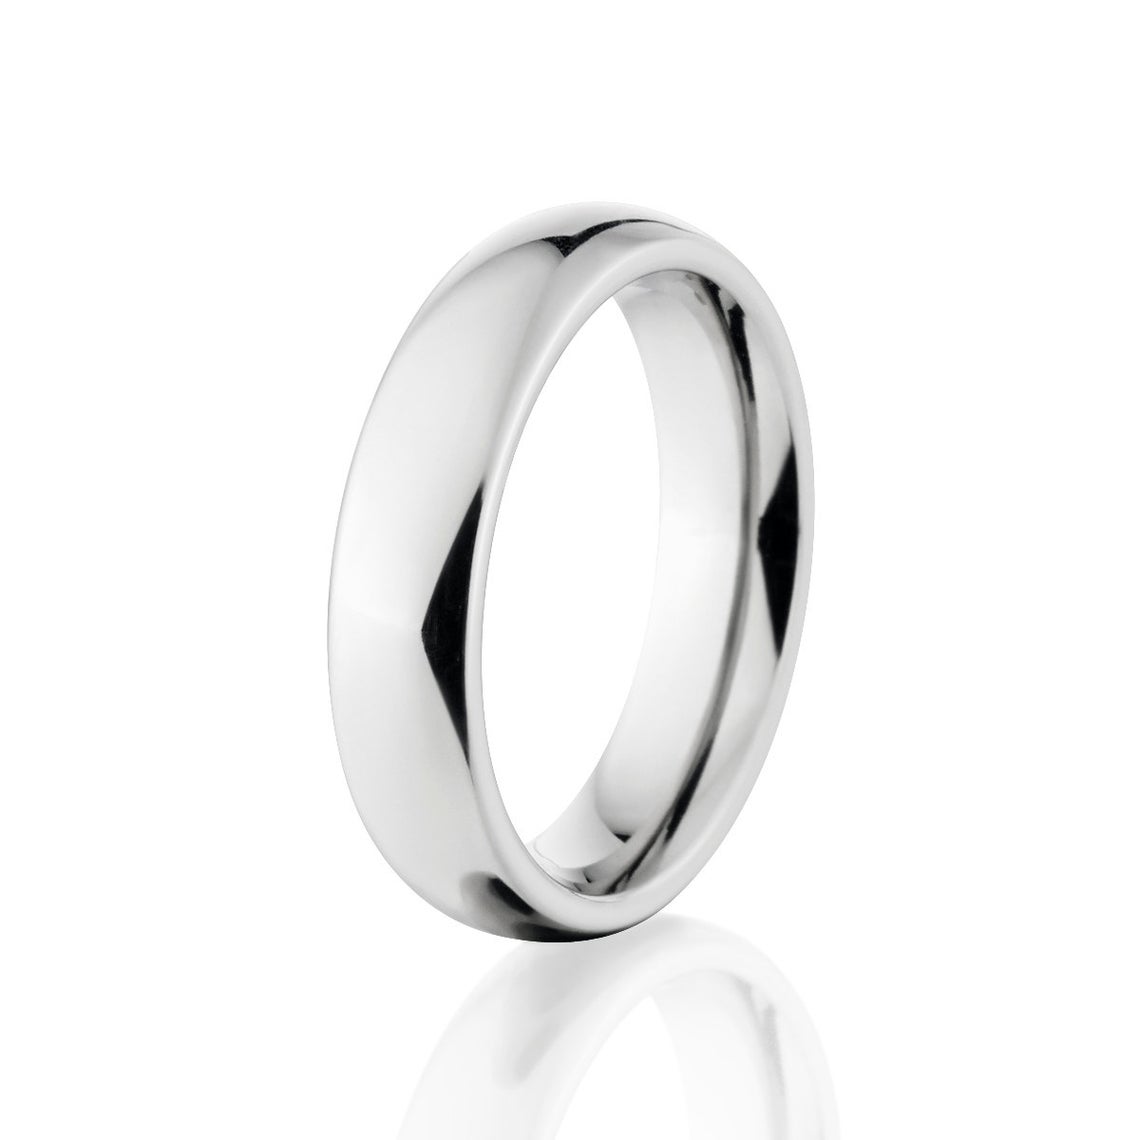 5mm wide polished cobalt wedding band with a rounded profile